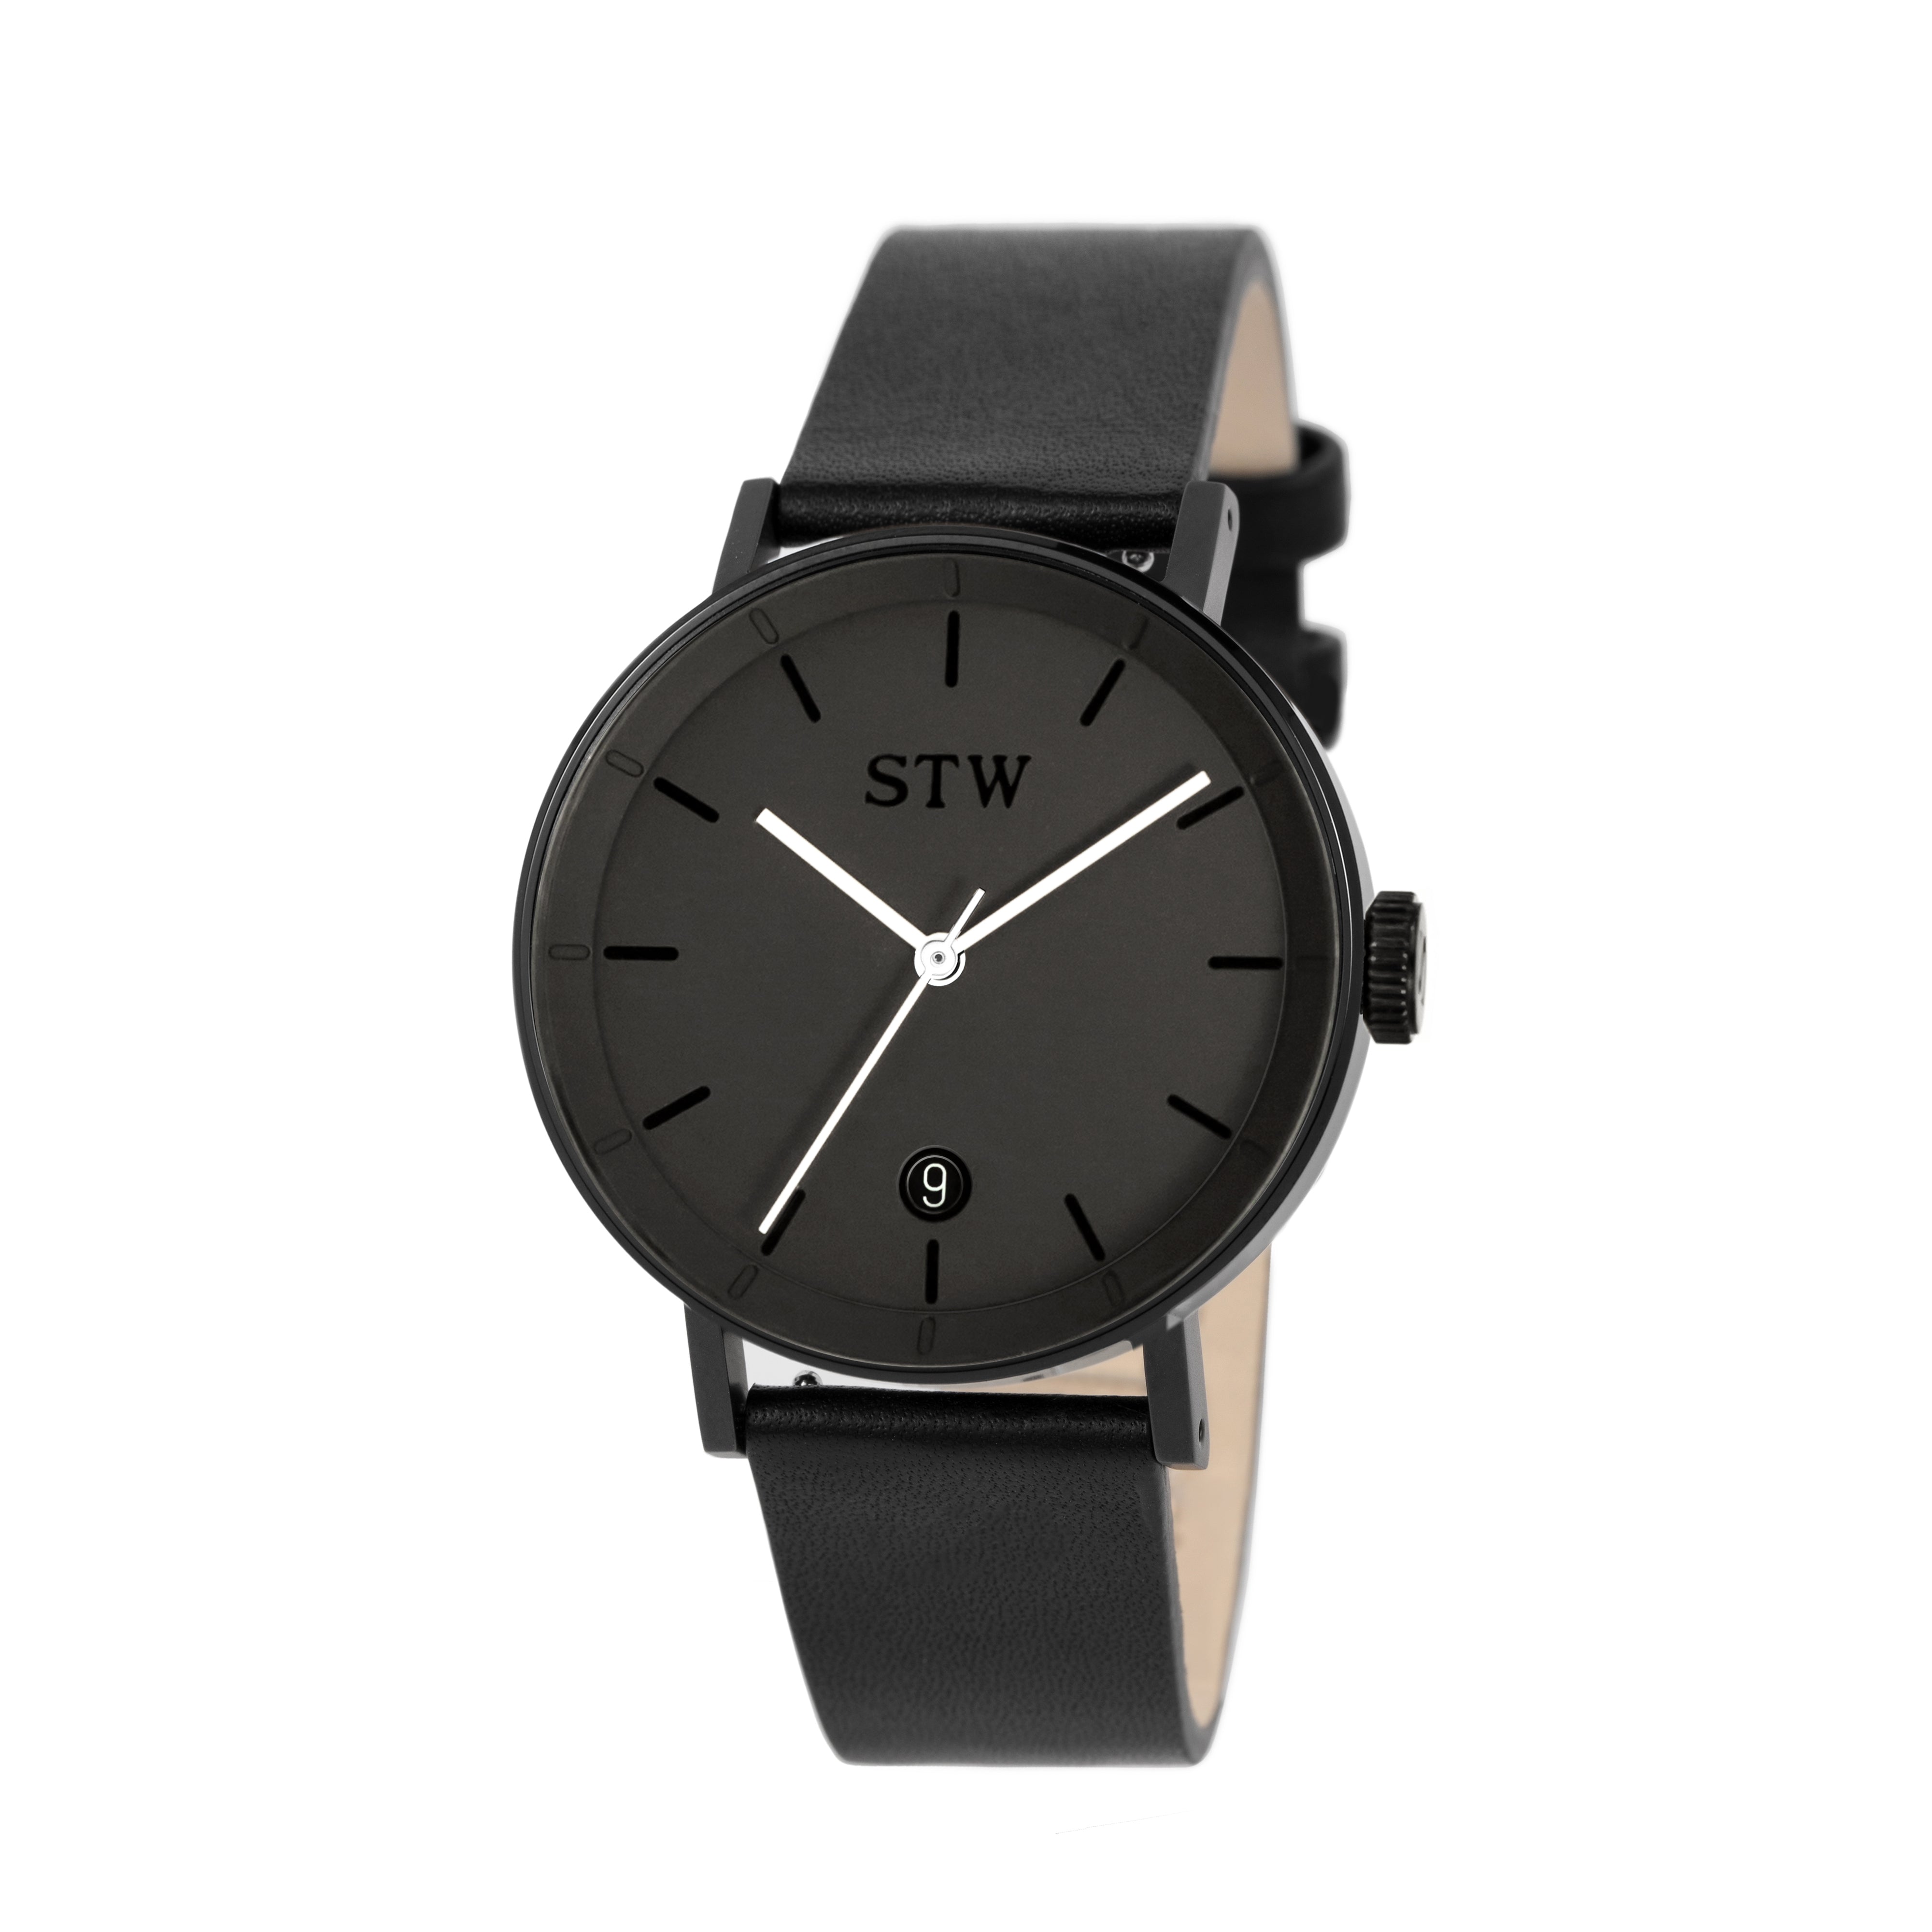 CUT OUT -  BLACK DIAL / BLACK LEATHER STRAP WATCH